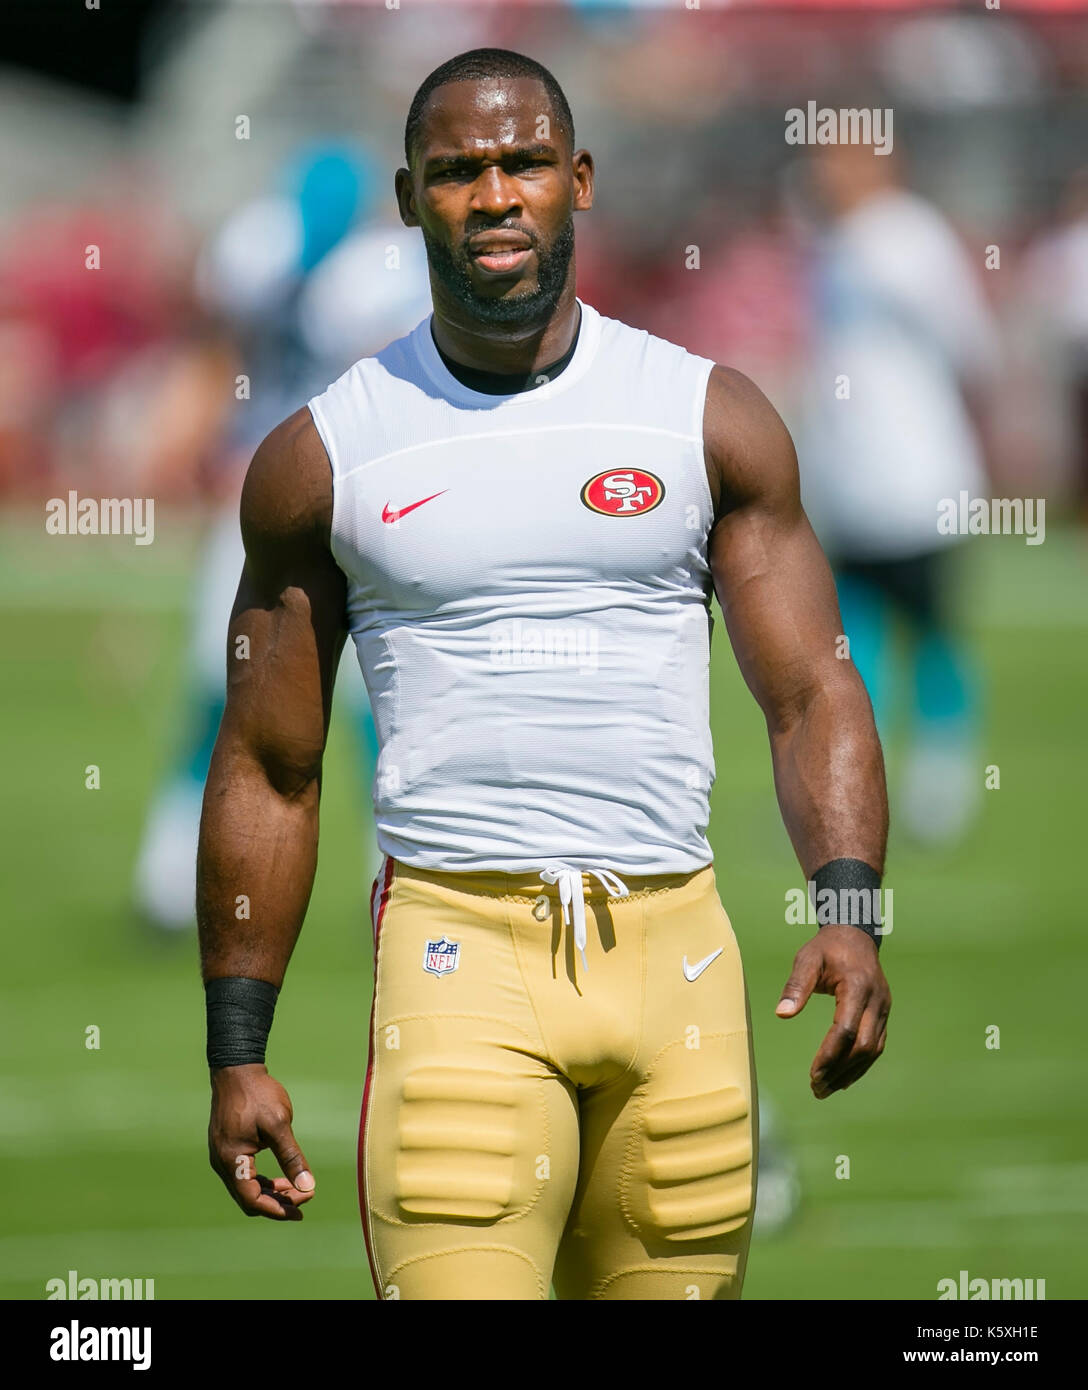 Santa Clara, CA. 10th Sep, 2017. San Francisco 49ers wide receiver Pierre  Garcon (15) warms up prior to the NFL football game between the Carolina  Panthers and the San Francisco 49ers at